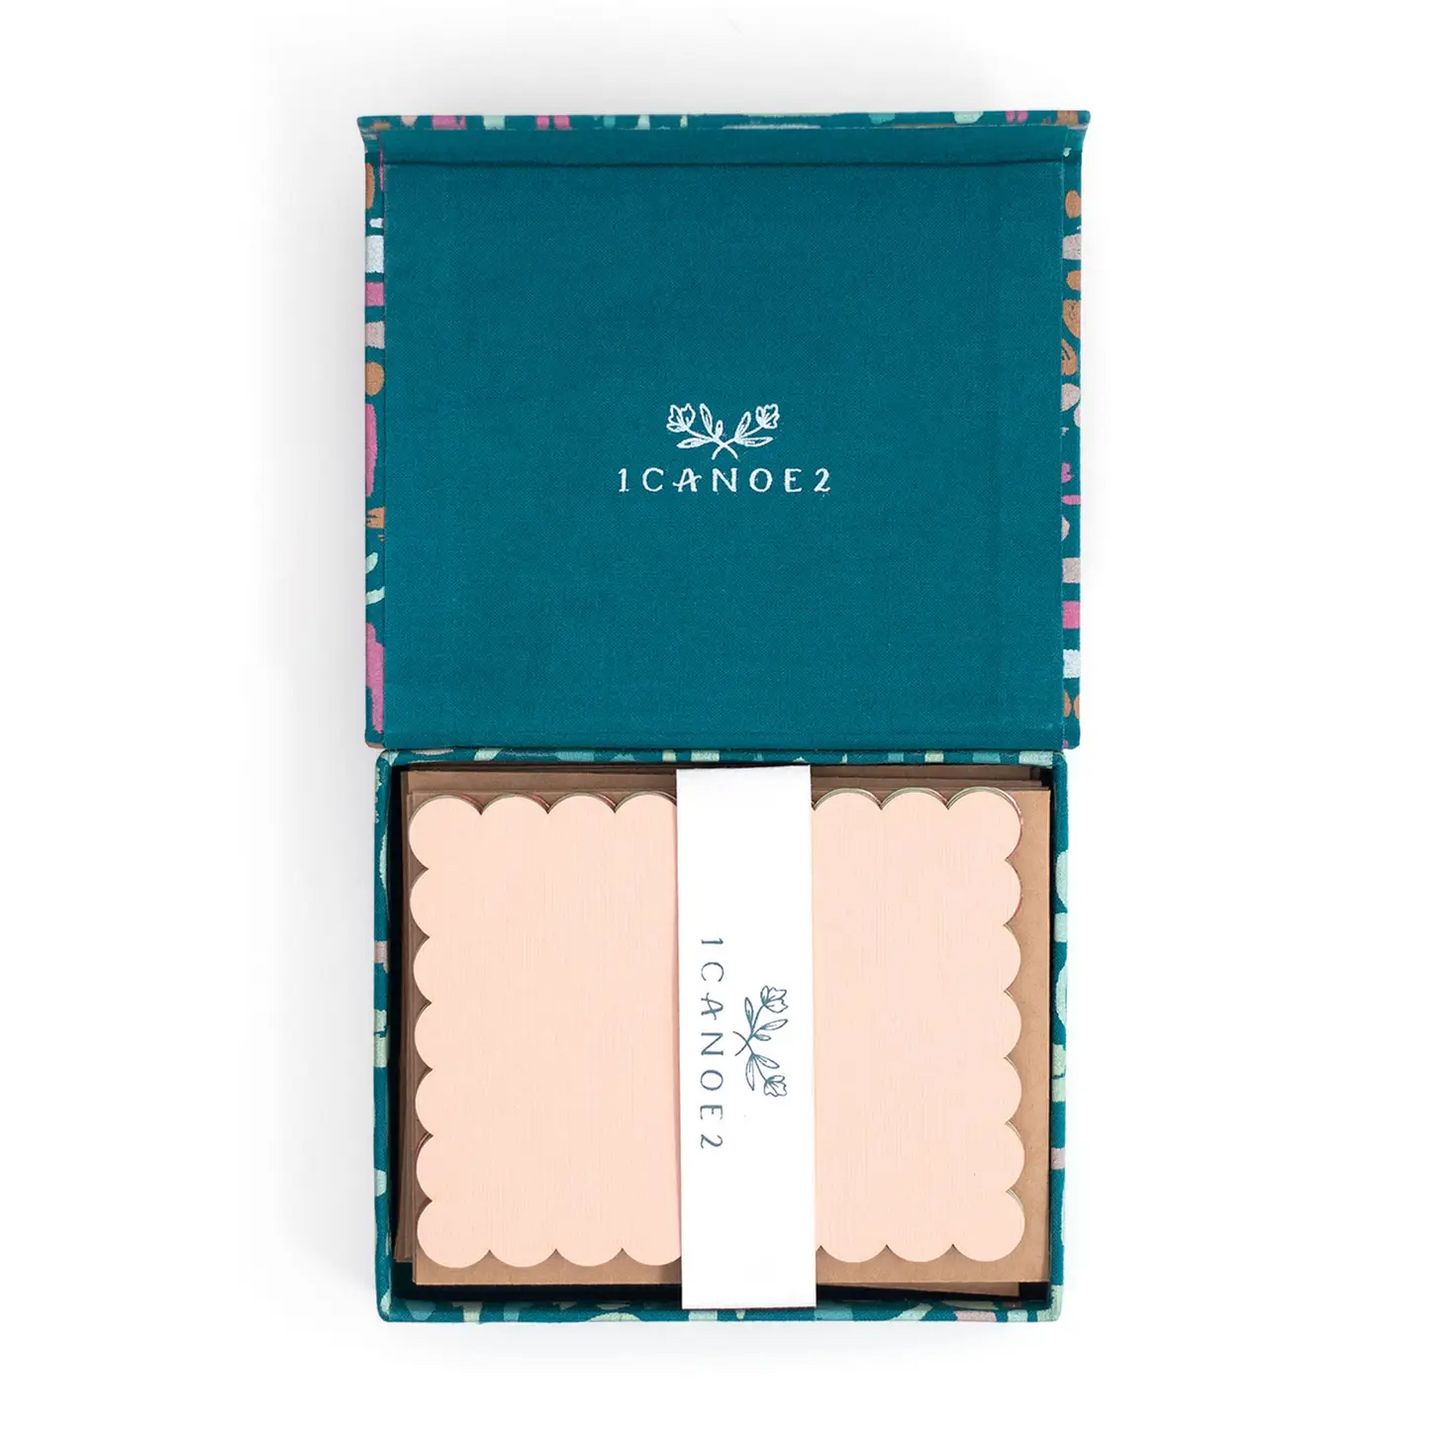 Luxury Handmade Paper Note Card Boxed Set